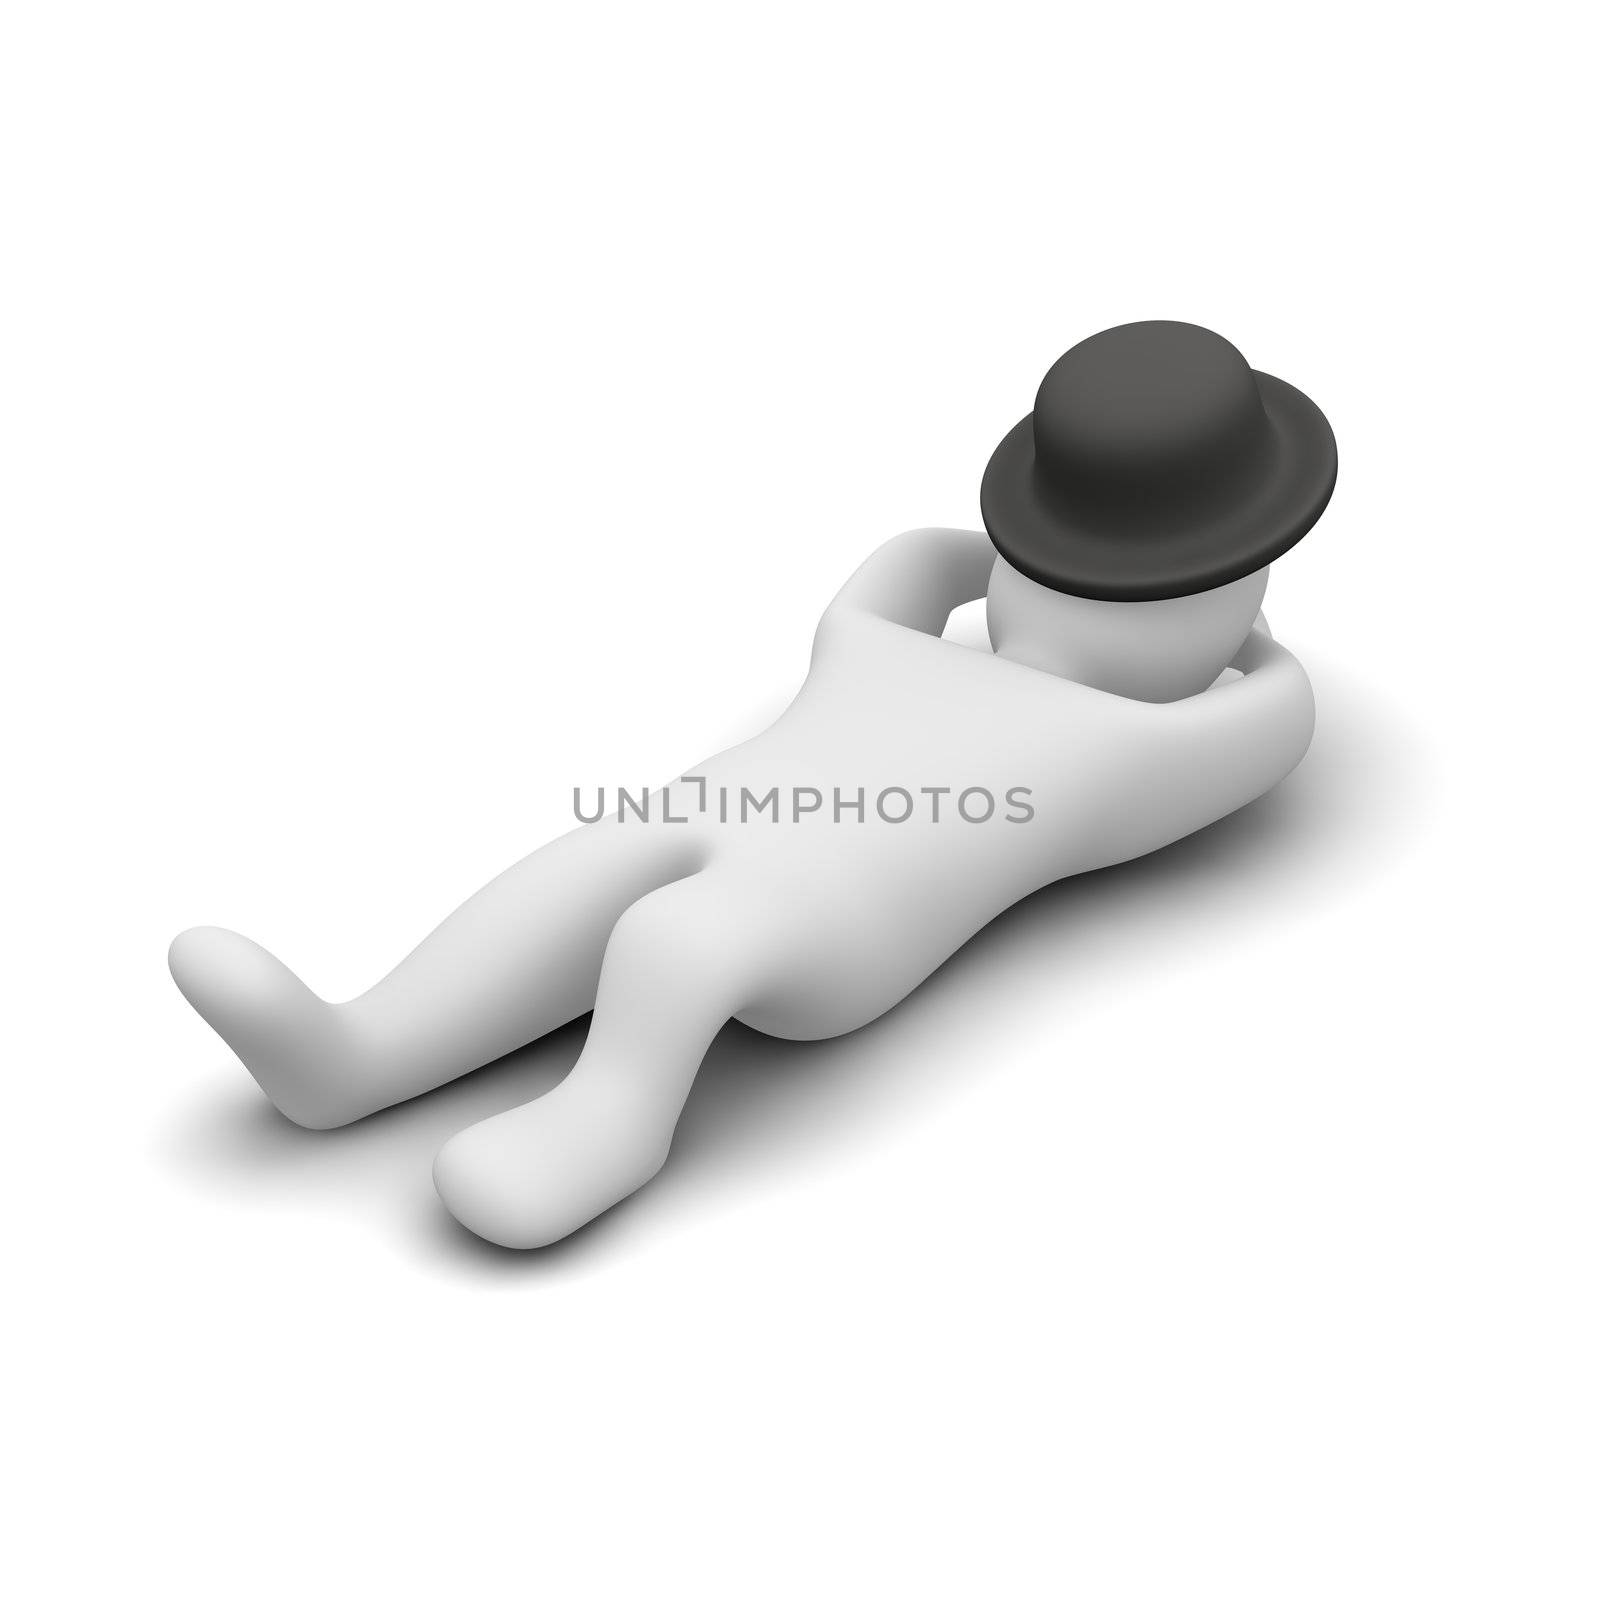 Man sleeping or relaxing under his hat. 3d rendered illustration.